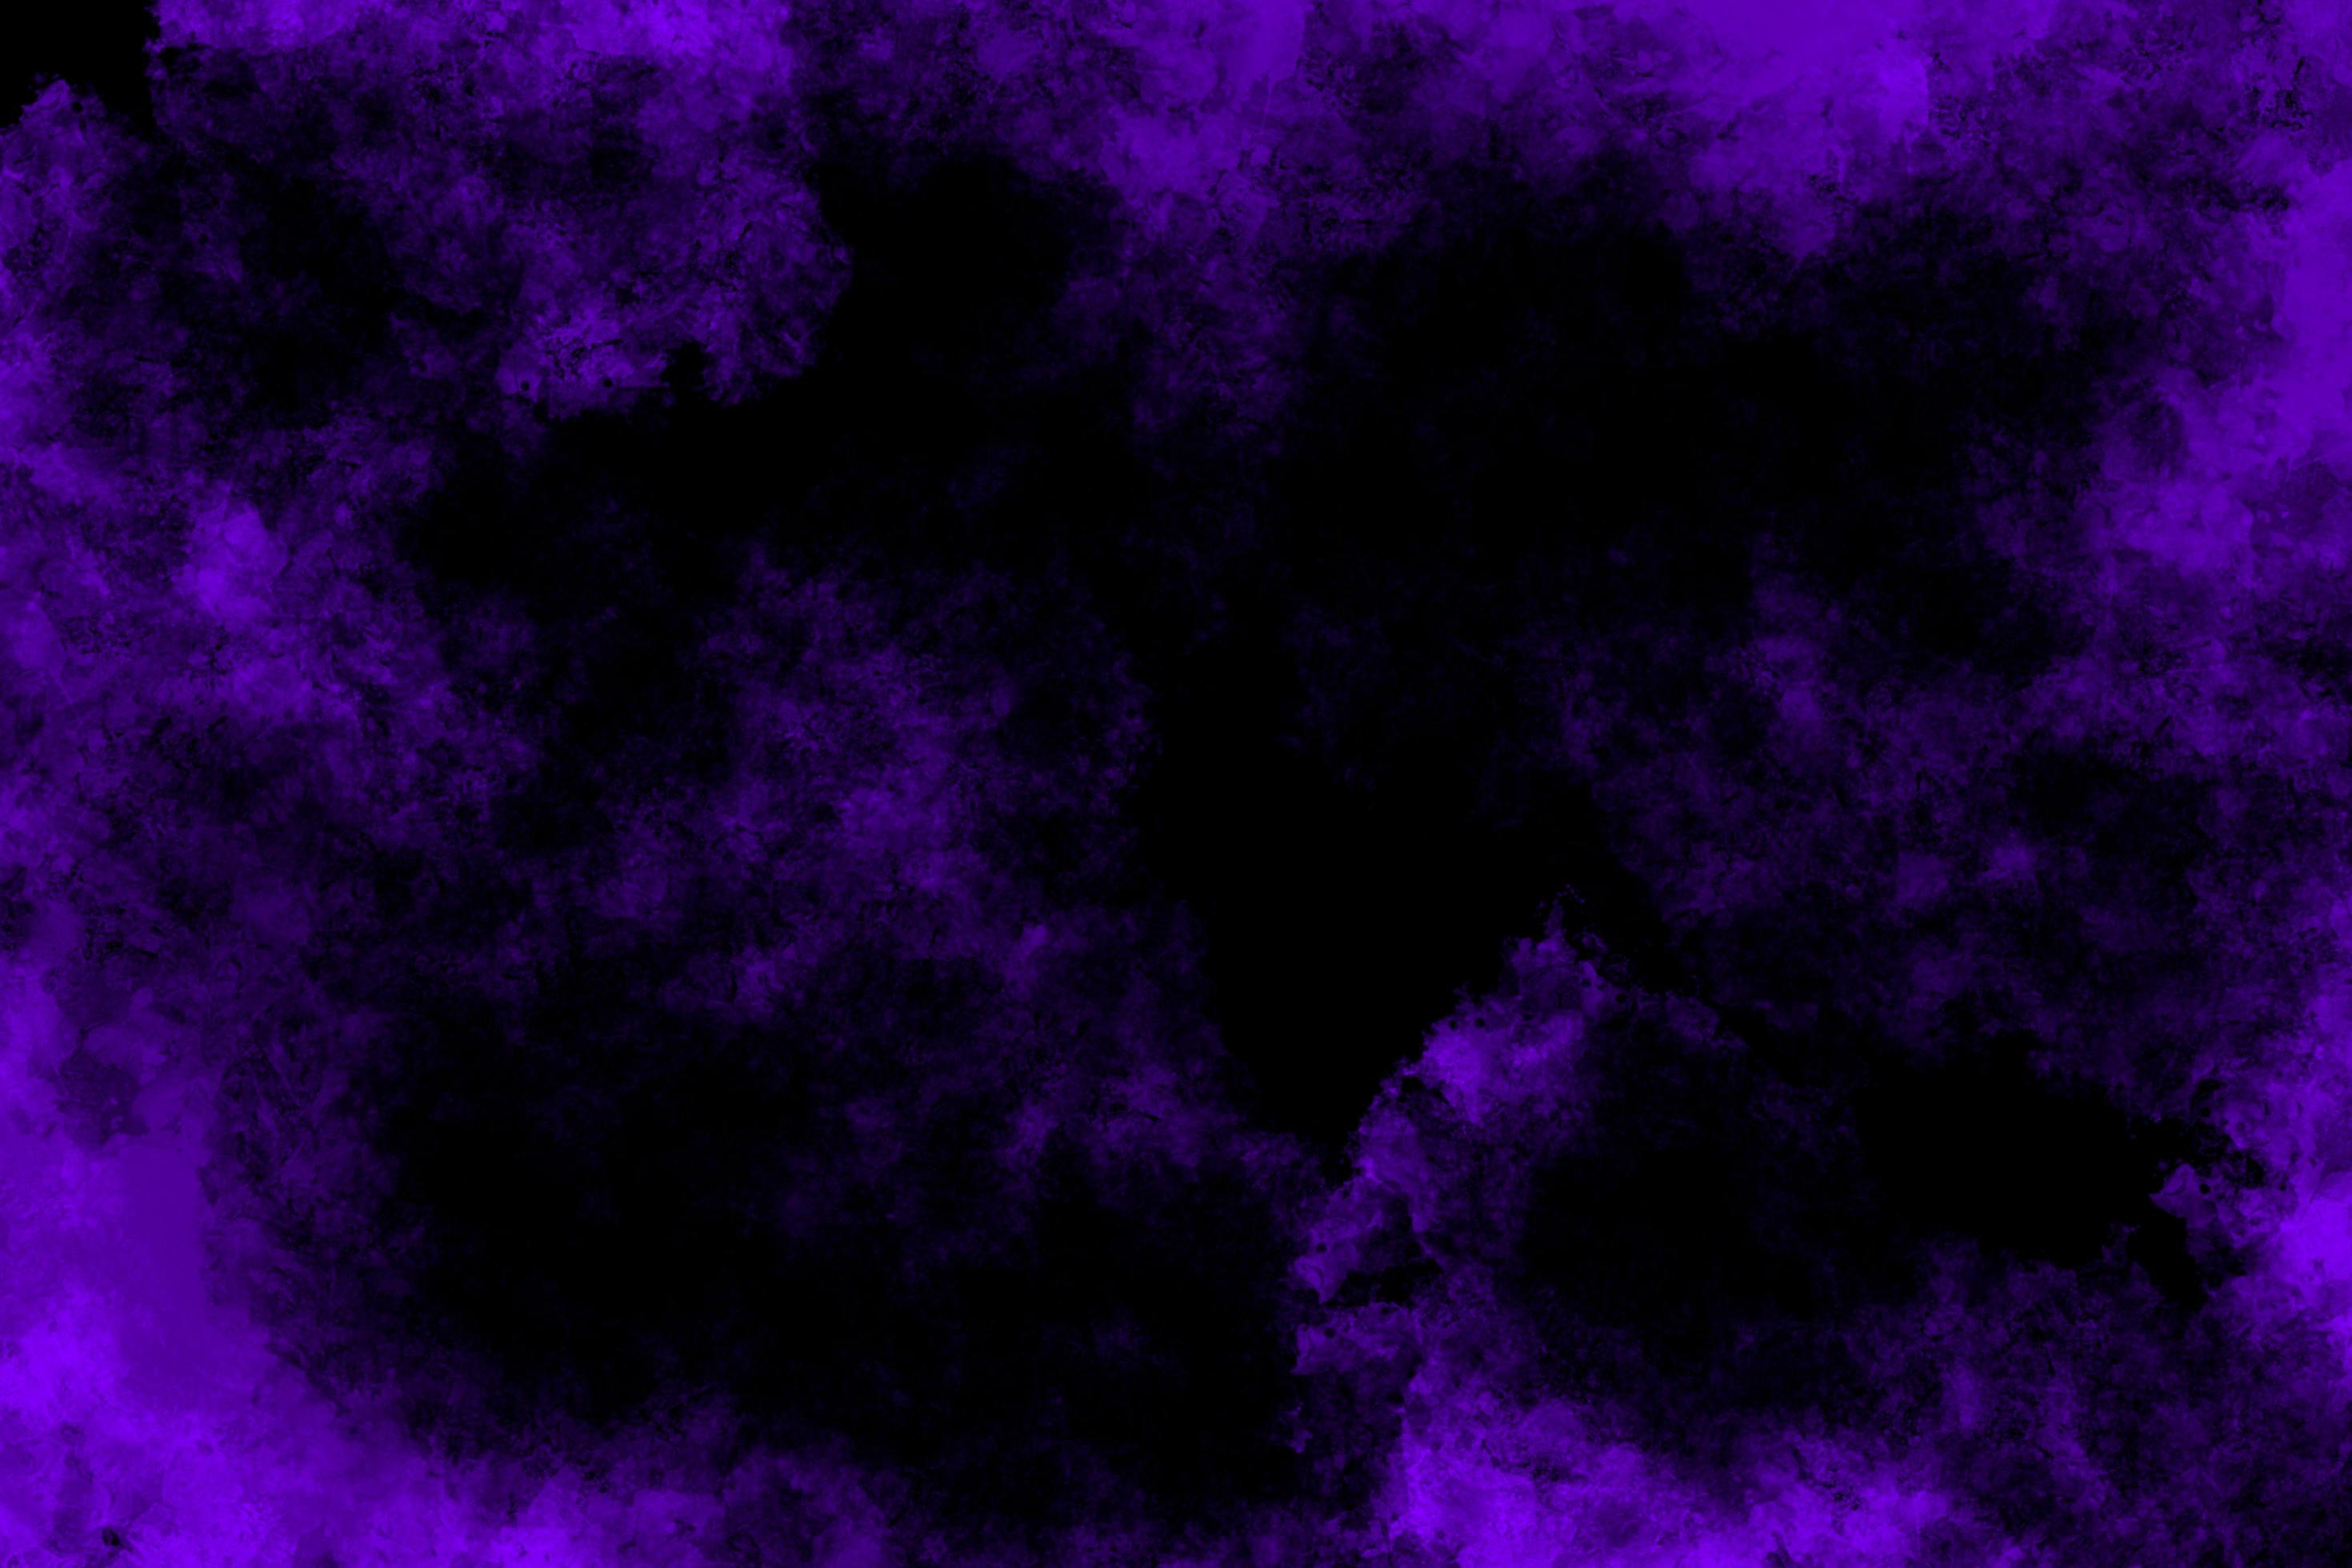 https://static.vecteezy.com/system/resources/previews/020/874/407/large_2x/dark-purple-watercolor-texture-on-black-background-free-photo.jpg